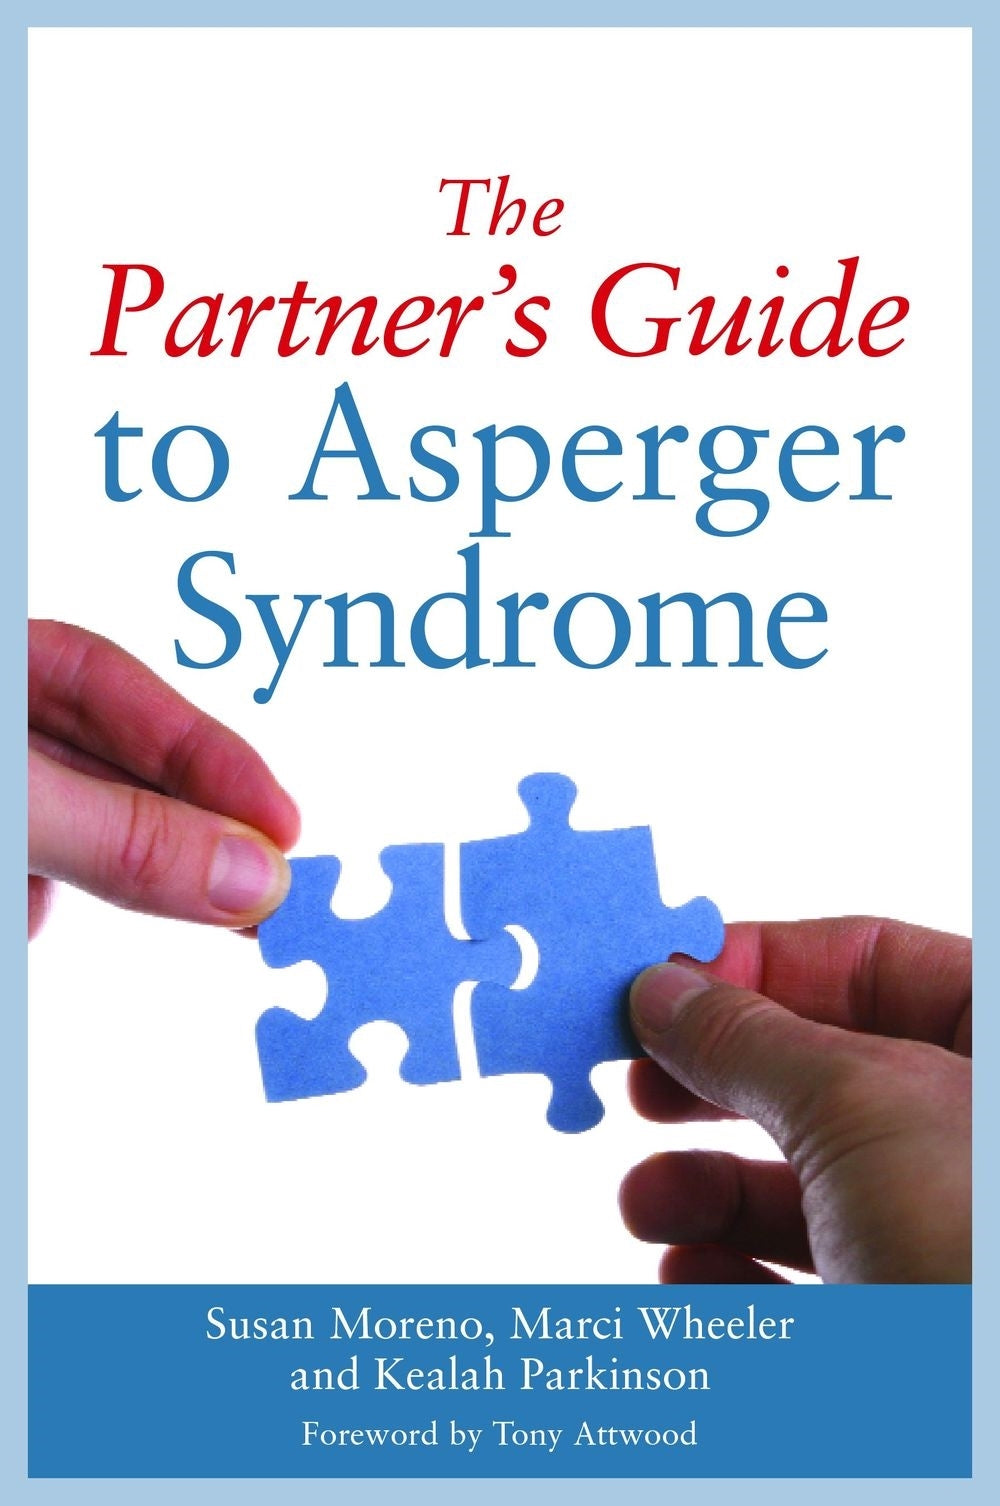 The Partner's Guide to Asperger Syndrome by Dr Anthony Attwood, Susan J. Moreno, Keelah Parkinson, Marci Wheeler